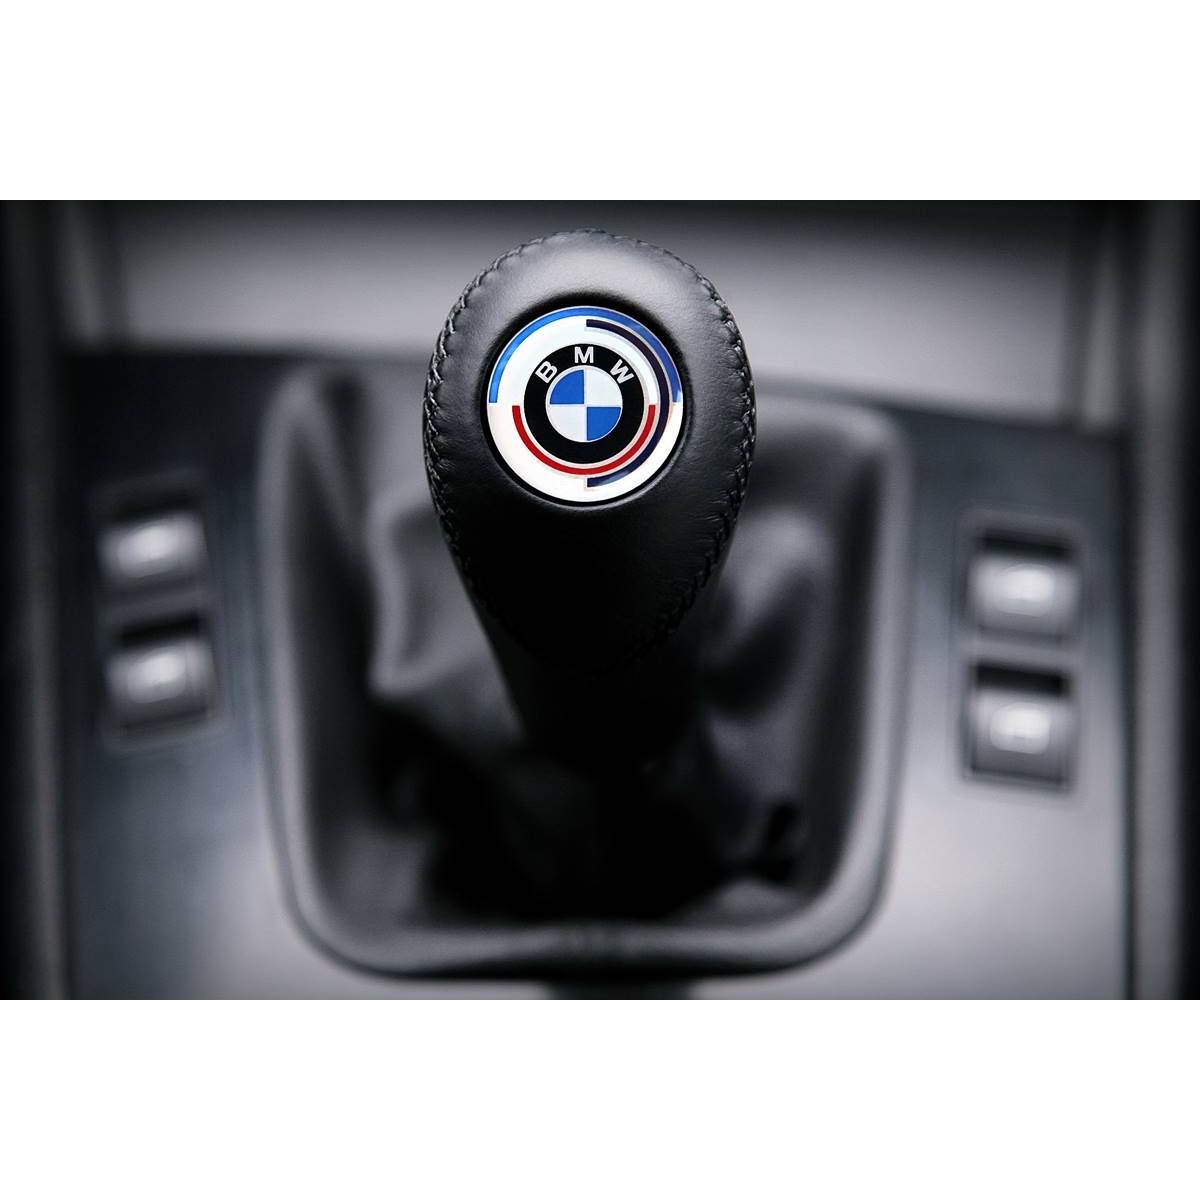 https://www.shiftknobs.eu/6146-thickbox_default/shift-knob-for-bmw-3-5-6-7-8-series-early-motorsport-4-5-6-speed-manual-transmission-genuine-leather-shifter-lever-push-in-type.jpg